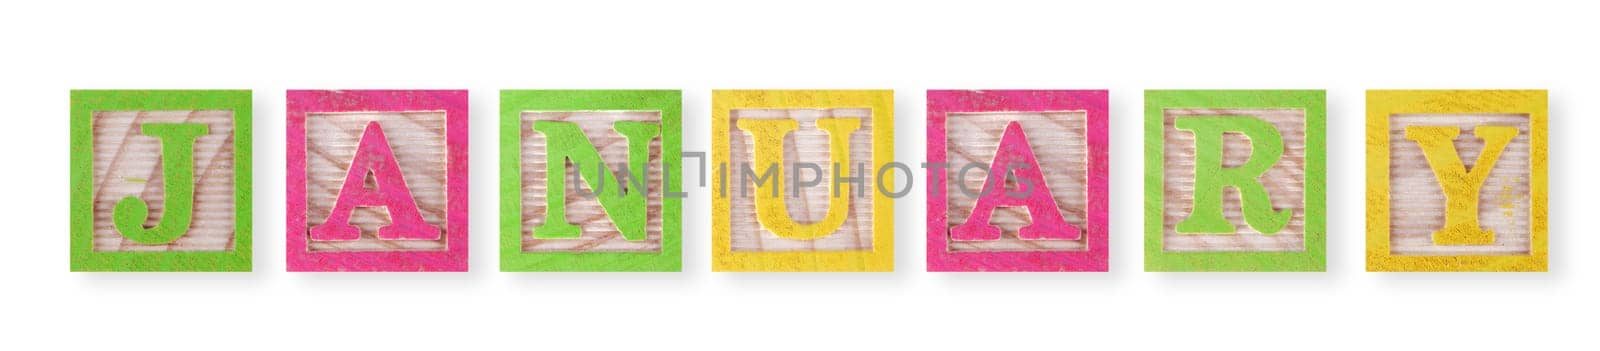 A January concept with childs wood blocks on white with clipping path to remove shadow